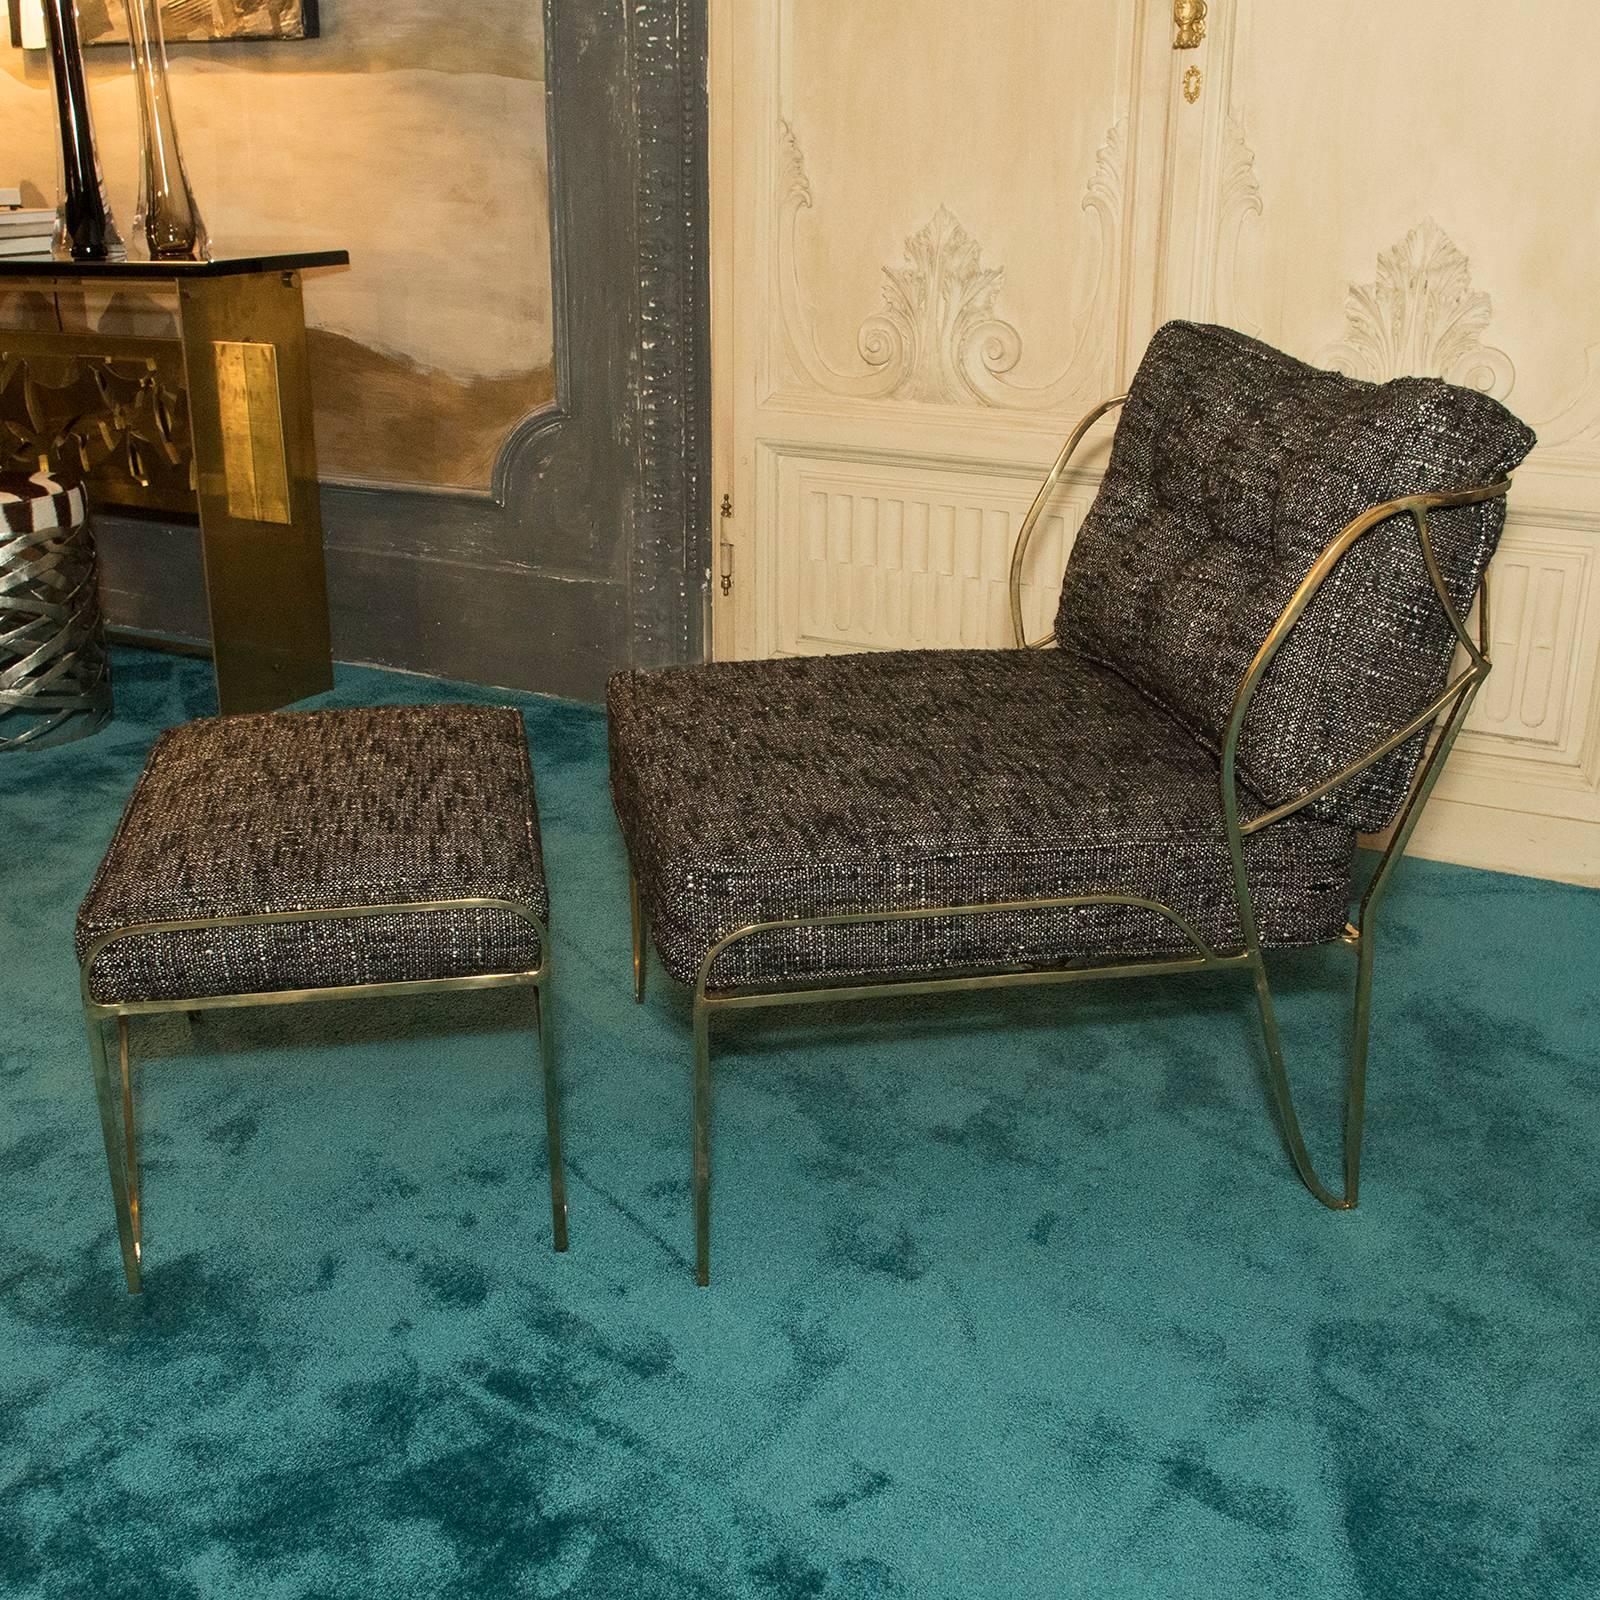 Sculptural gilded bronze structure, upholstery in brown/black fabric, ottoman size cm 60 x 42 x H.38.